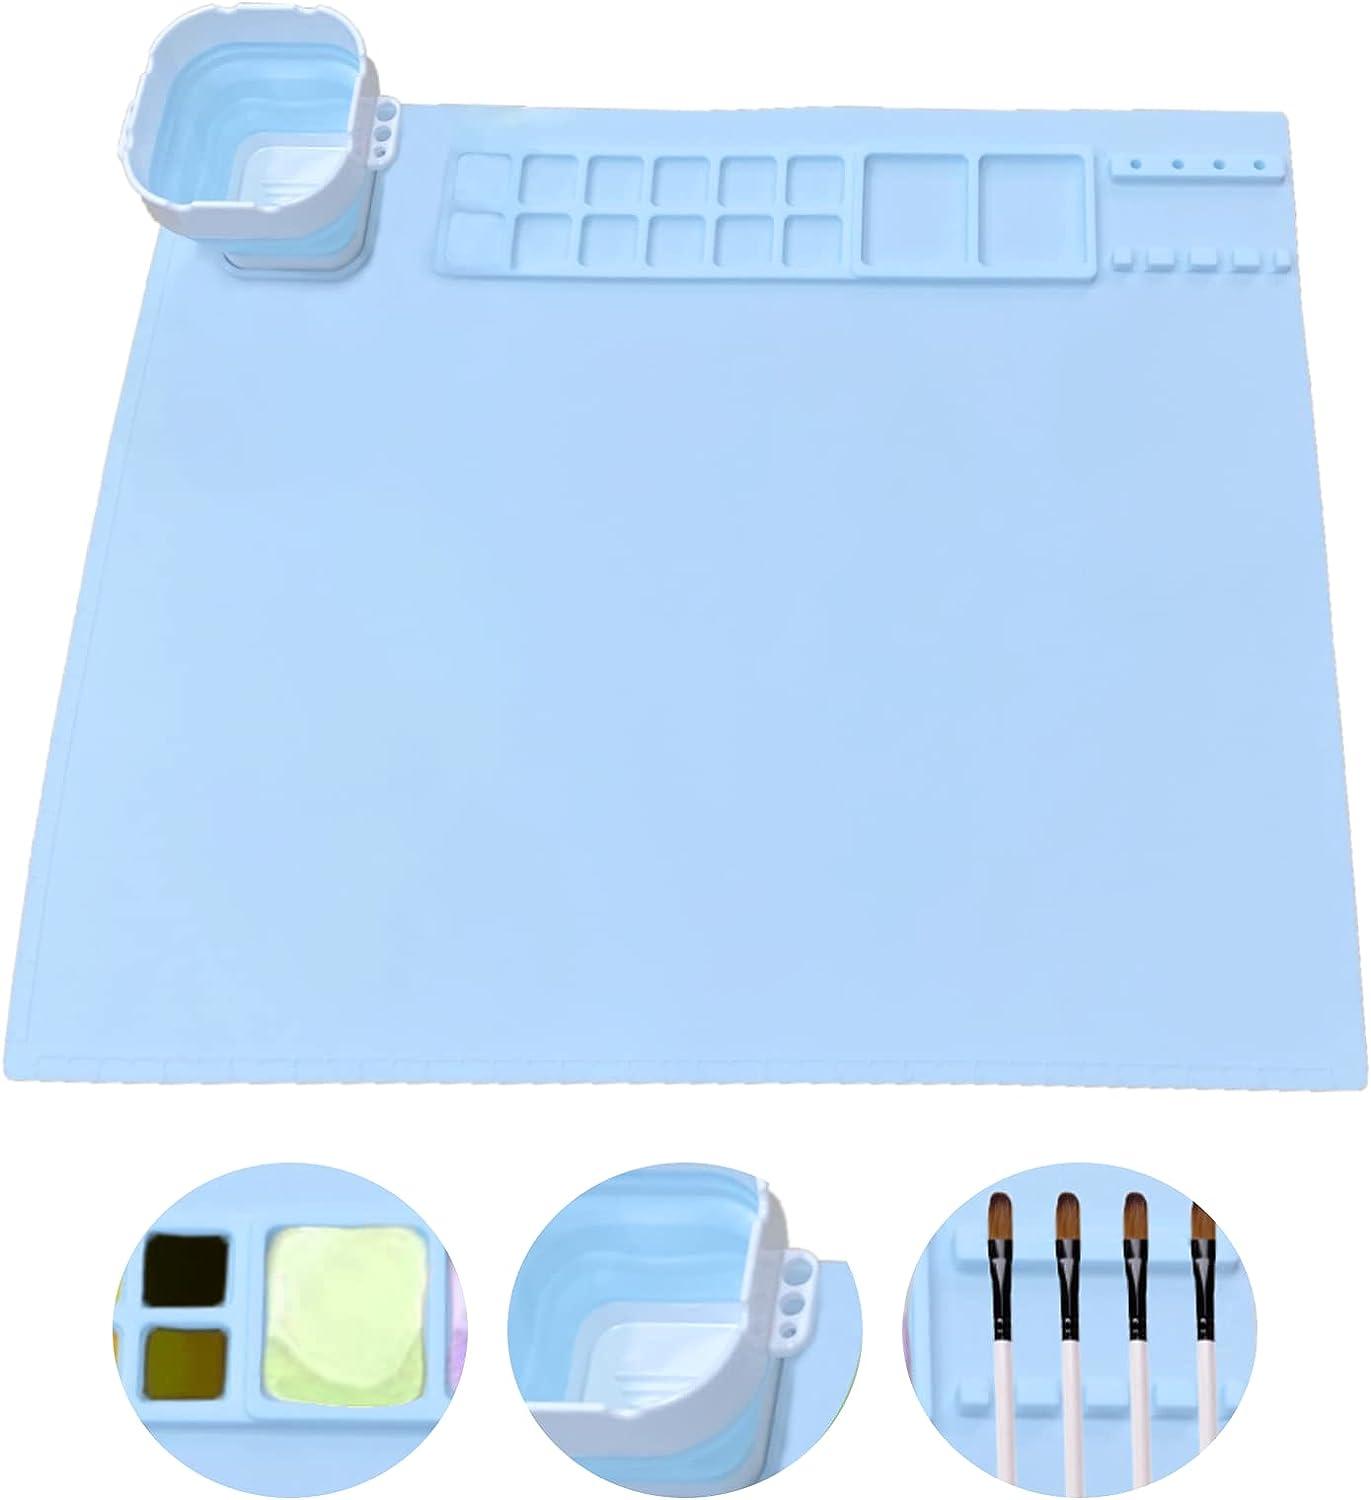 Silicone Craft Mat for Resin Casting, 20x16Non Stick Silicone